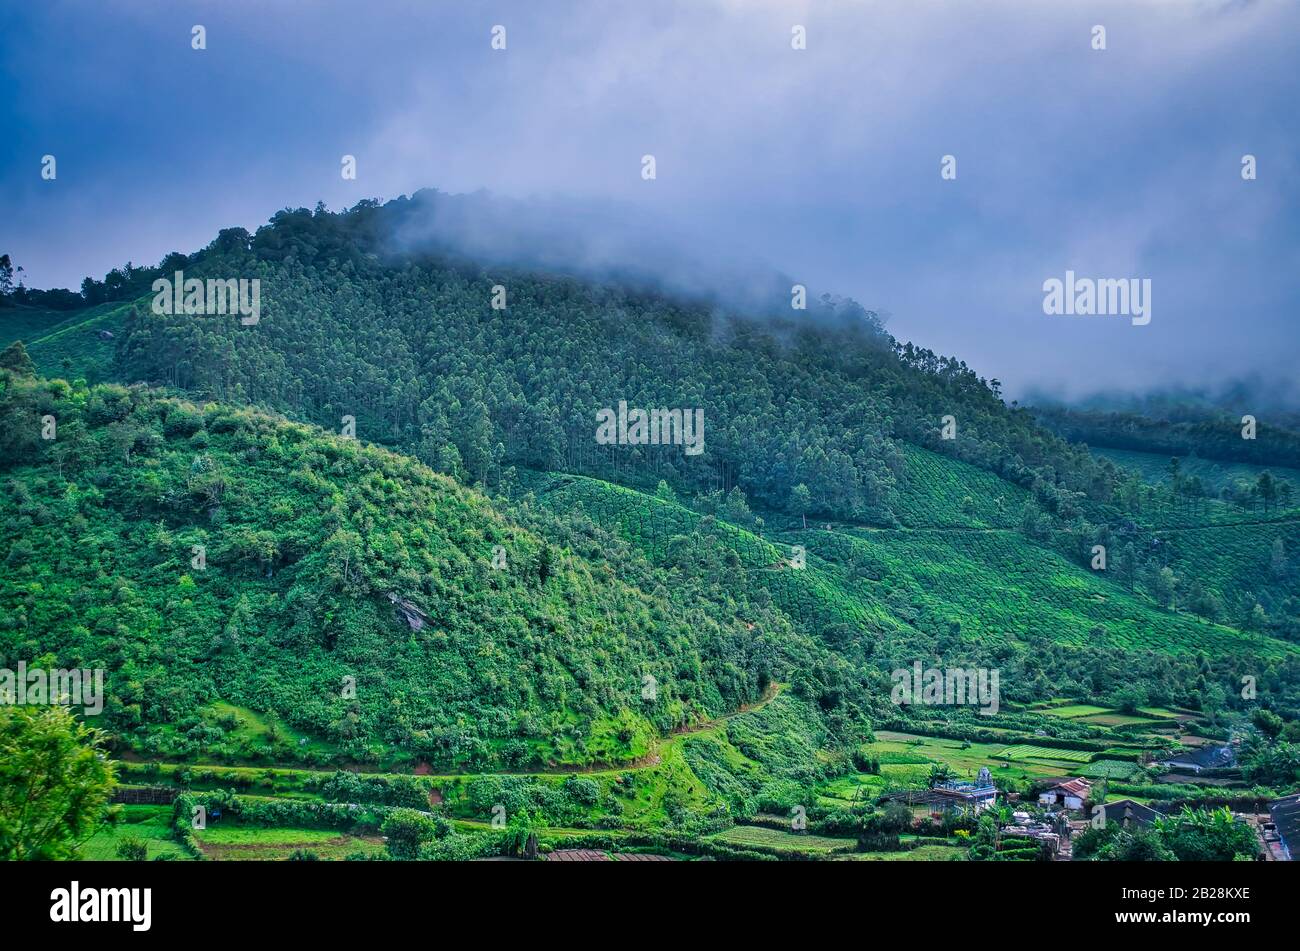 Foggy mountain covered in greenery and houses at the bottom of the hill. From Munnar, Kerala, India. Stock Photo